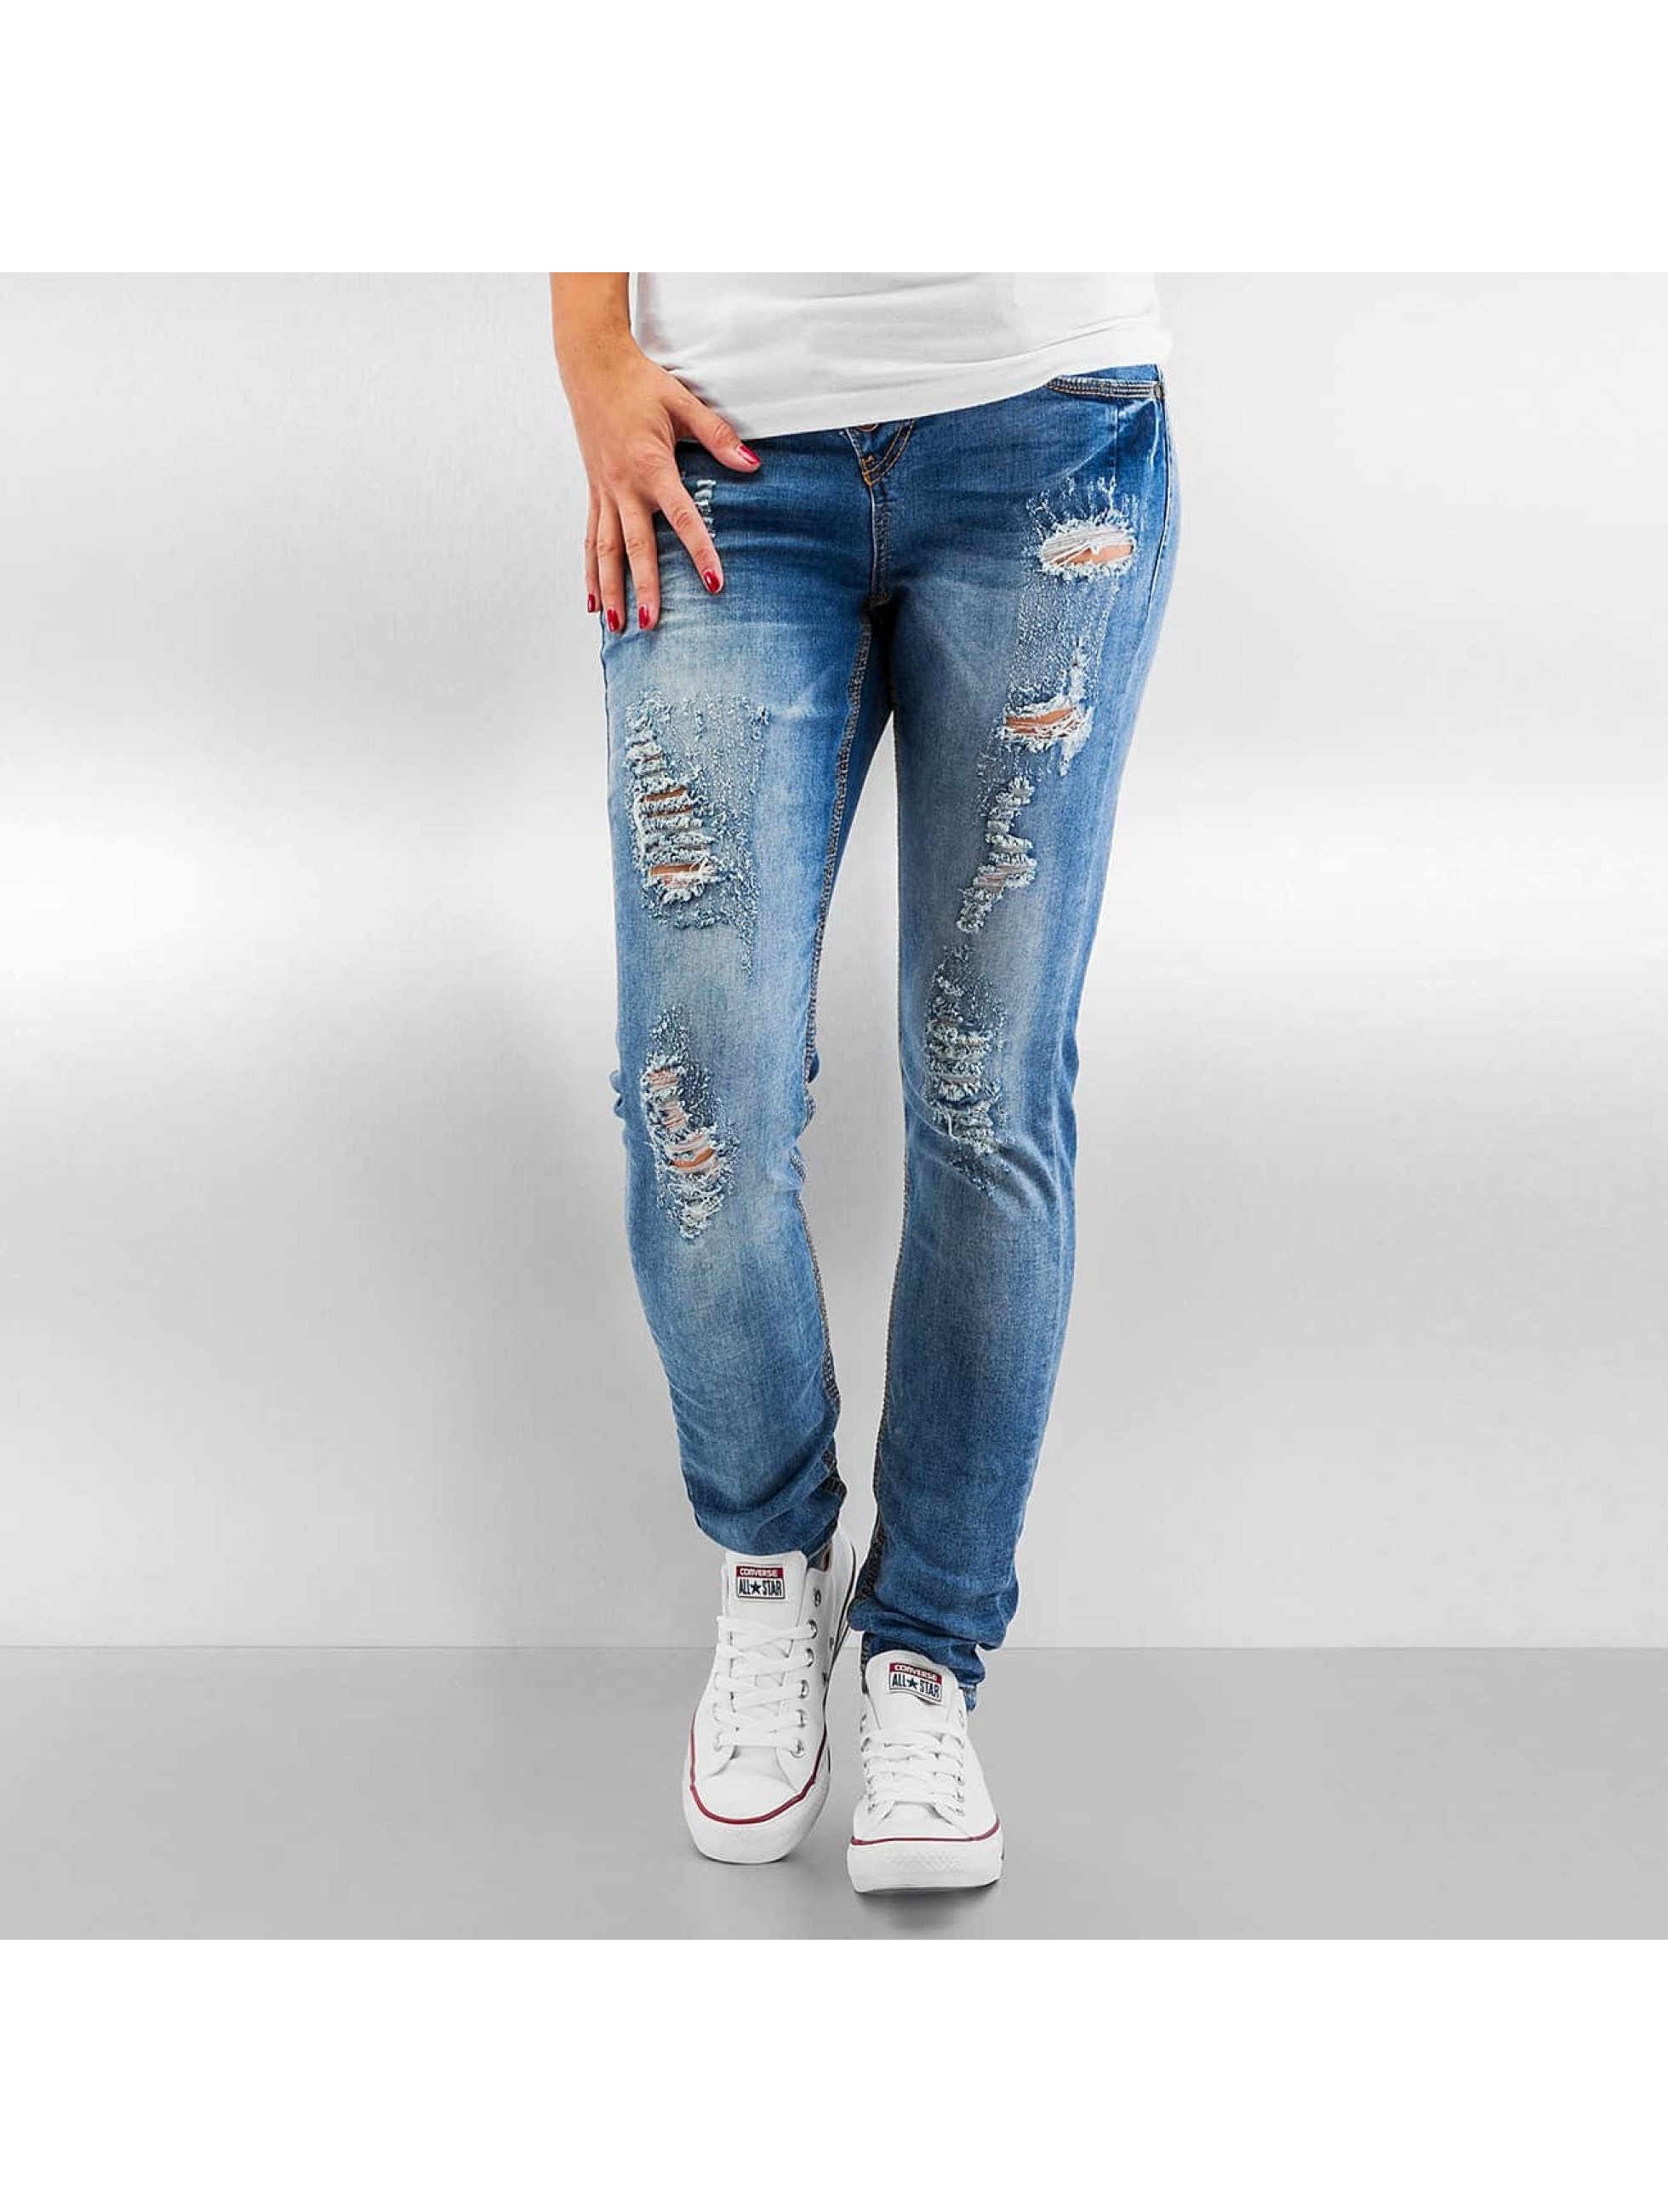 Authentic Style Jeans / Skinny jeans Destroyed in blauw